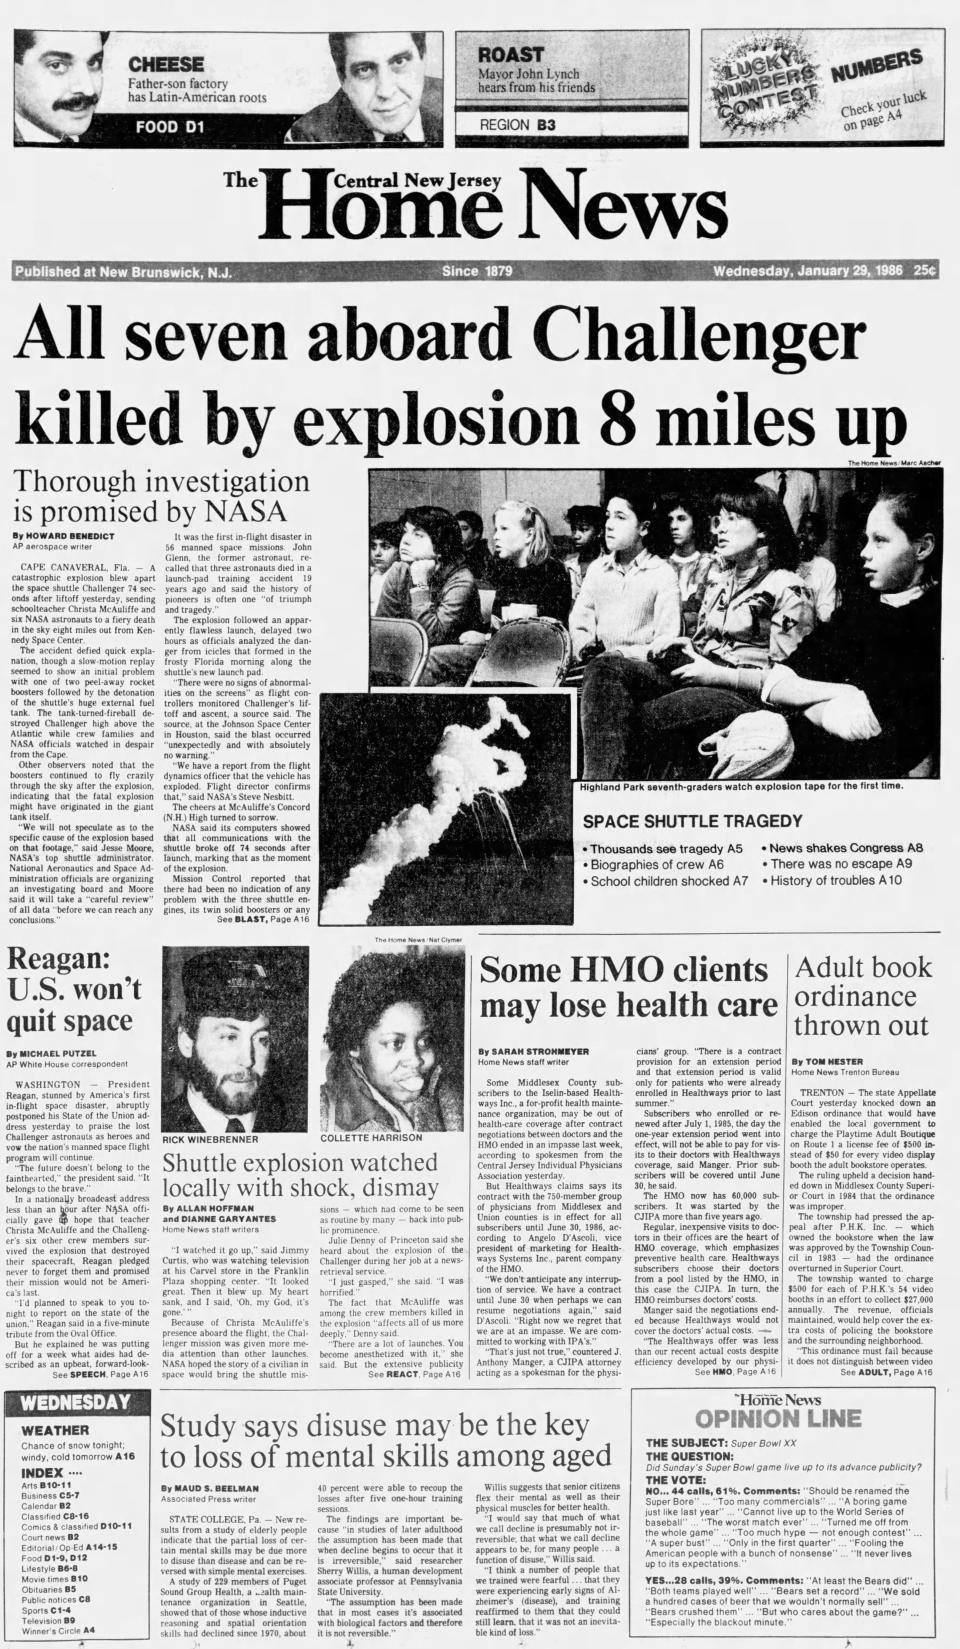 The Wednesday, Jan. 29, 1986, edition of The Central New Jersey Home News, with news of the Challenger explosion on the front page.